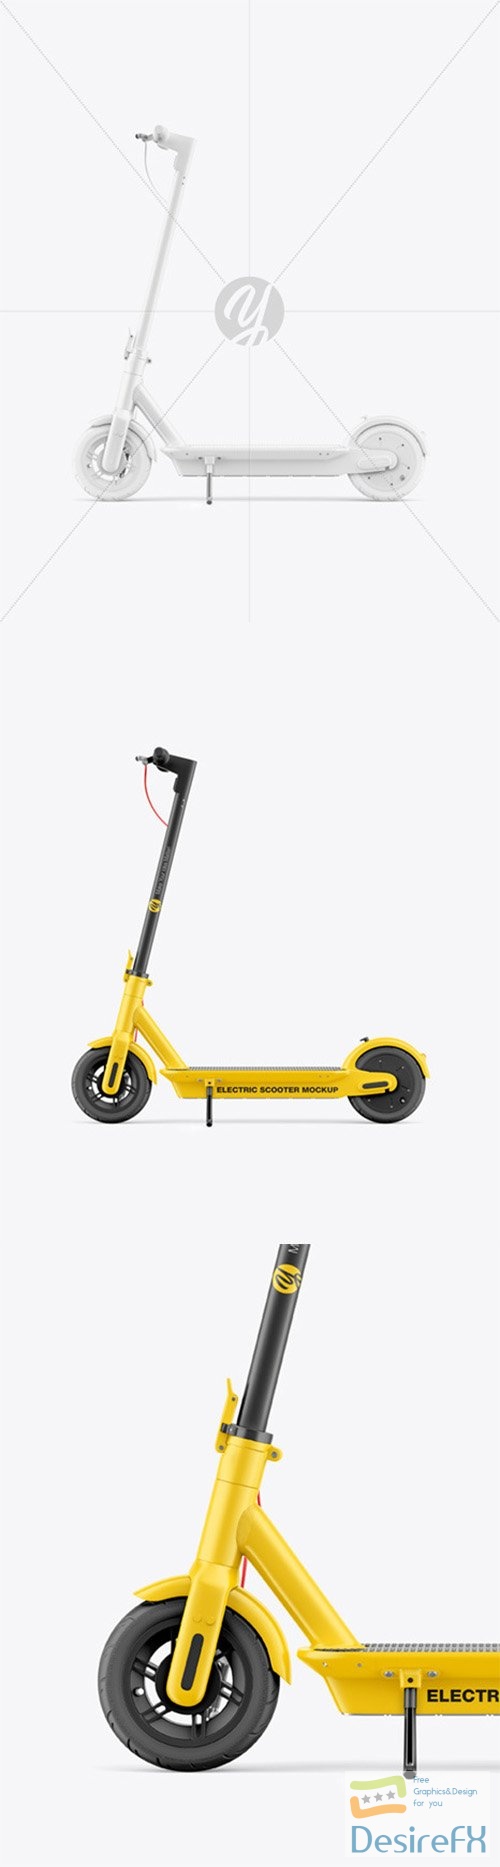 Electric Scooter Mockup - Side View 86115 TIF